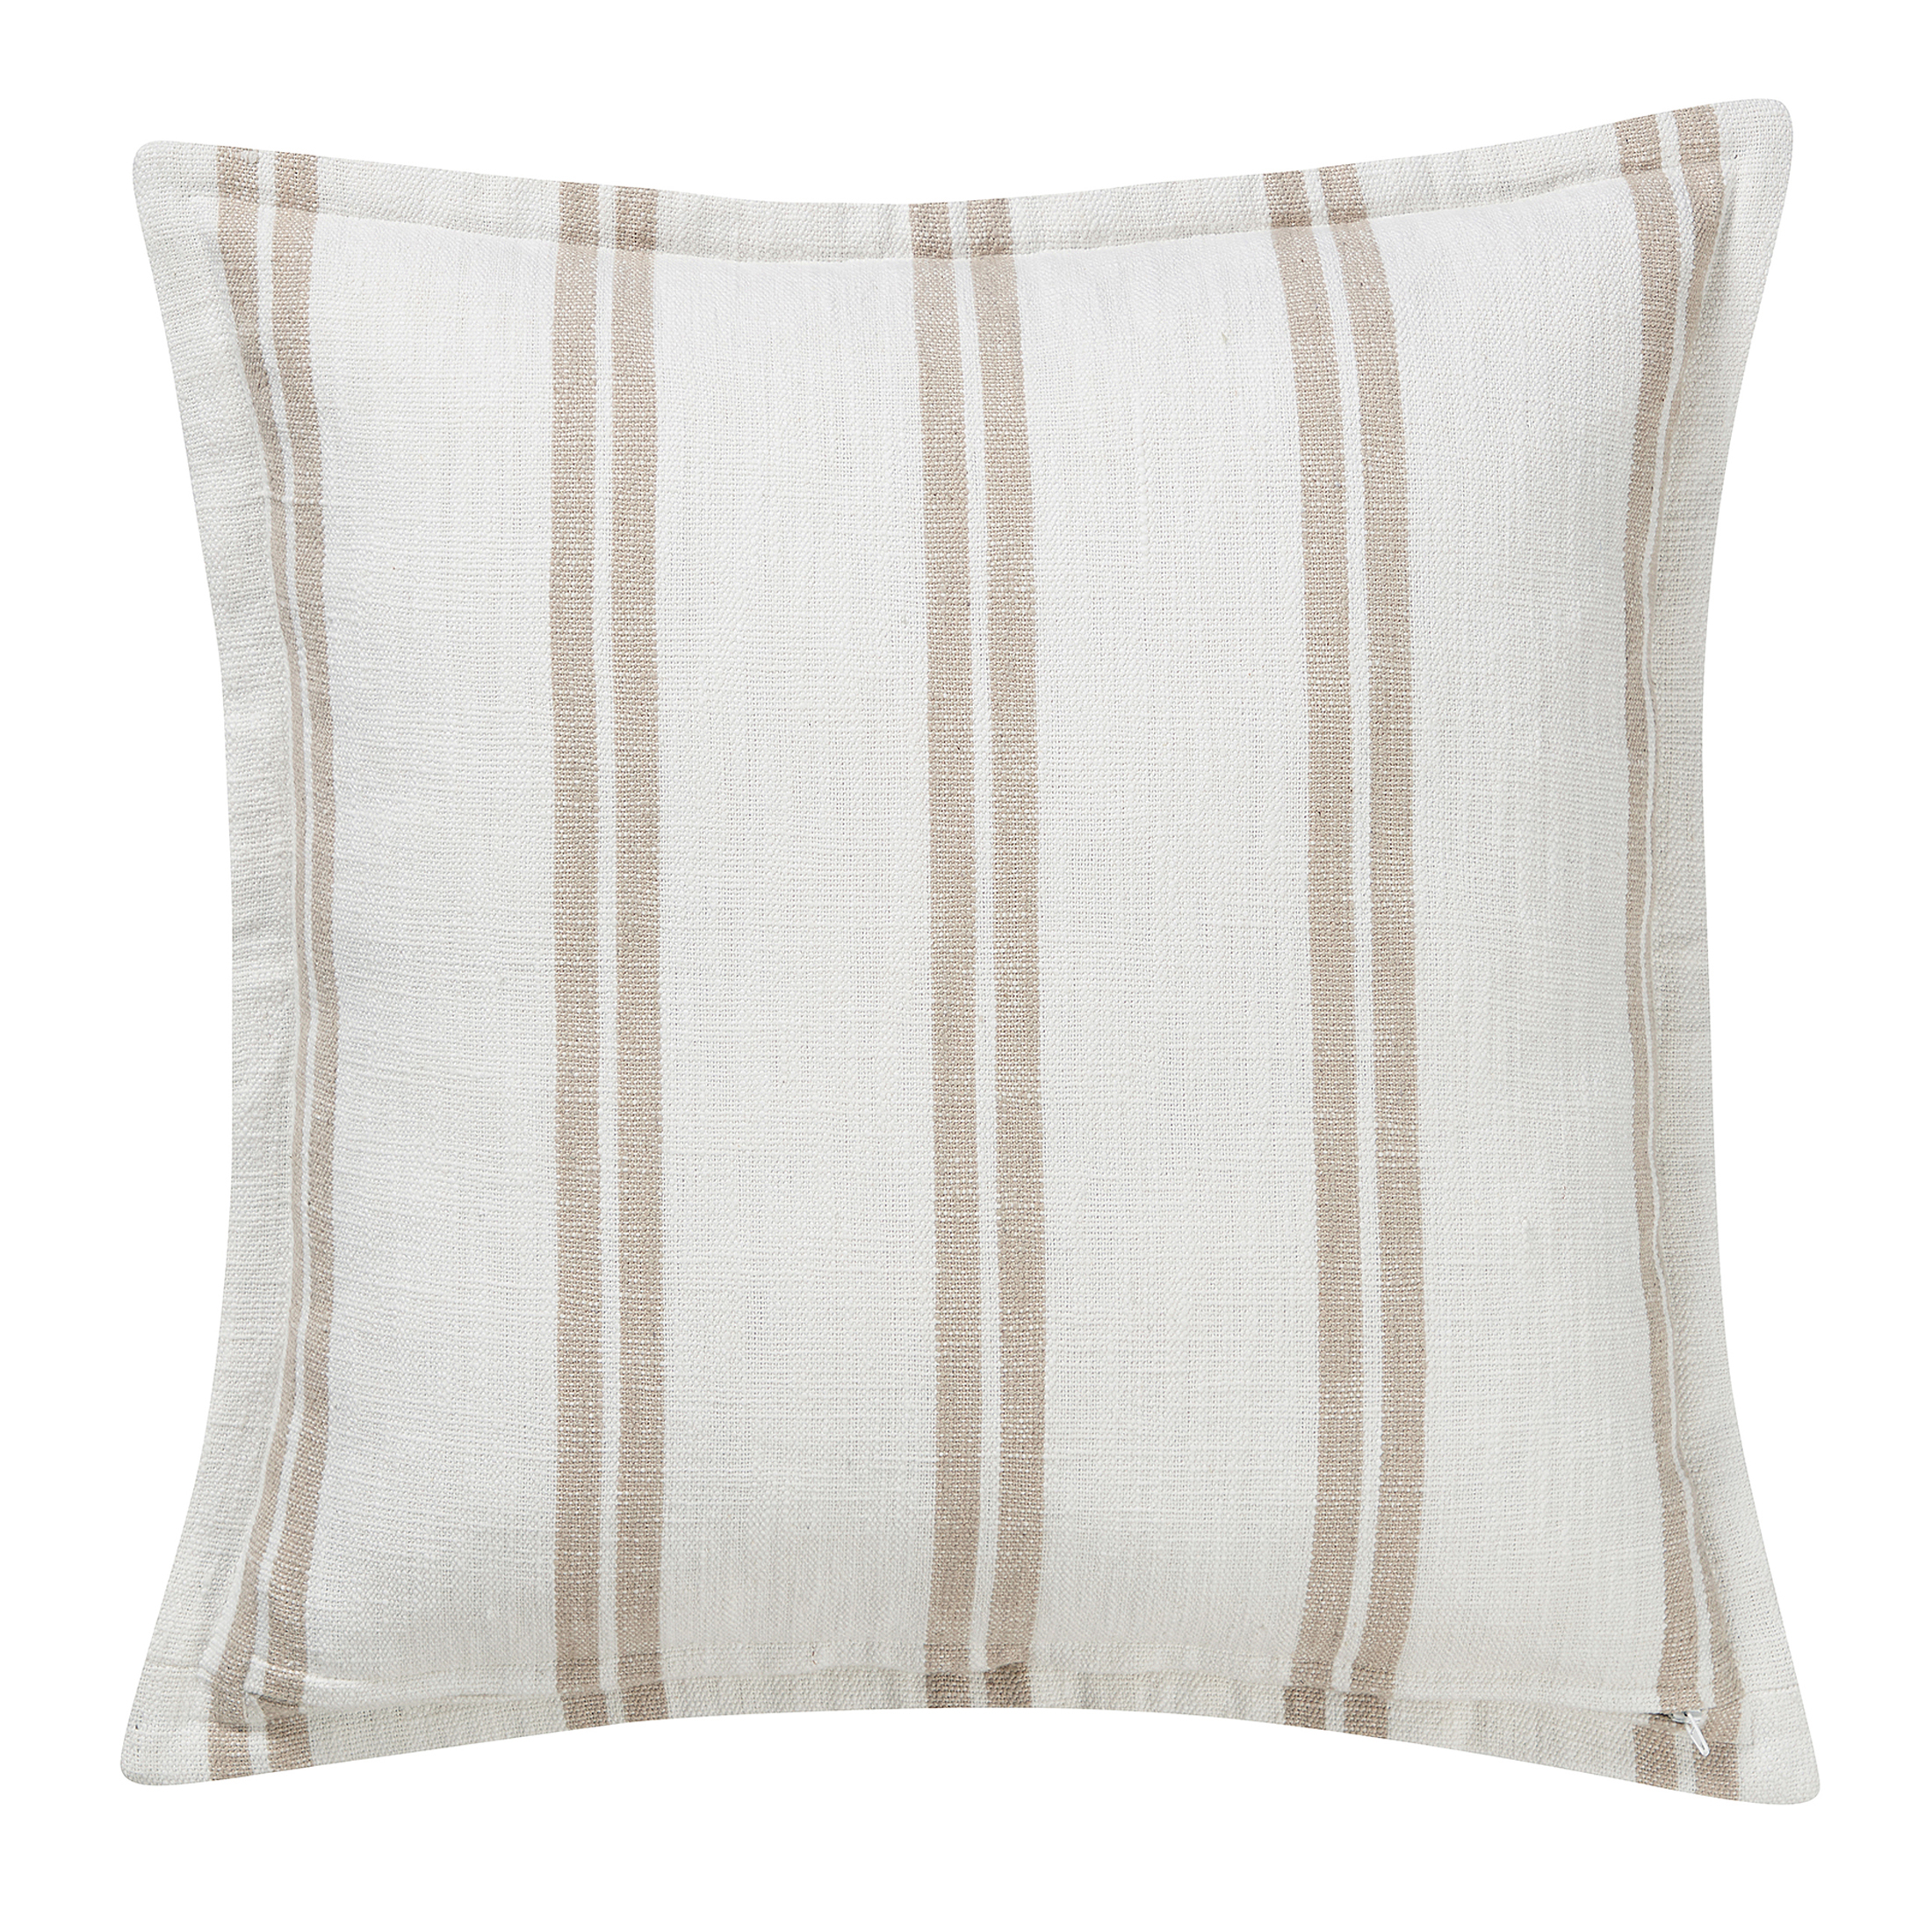 My Texas House Sienna Cotton Yarn Dyed Reversible Decorative Pillow Cover, 22"X22", Coconut Milk - image 2 of 14